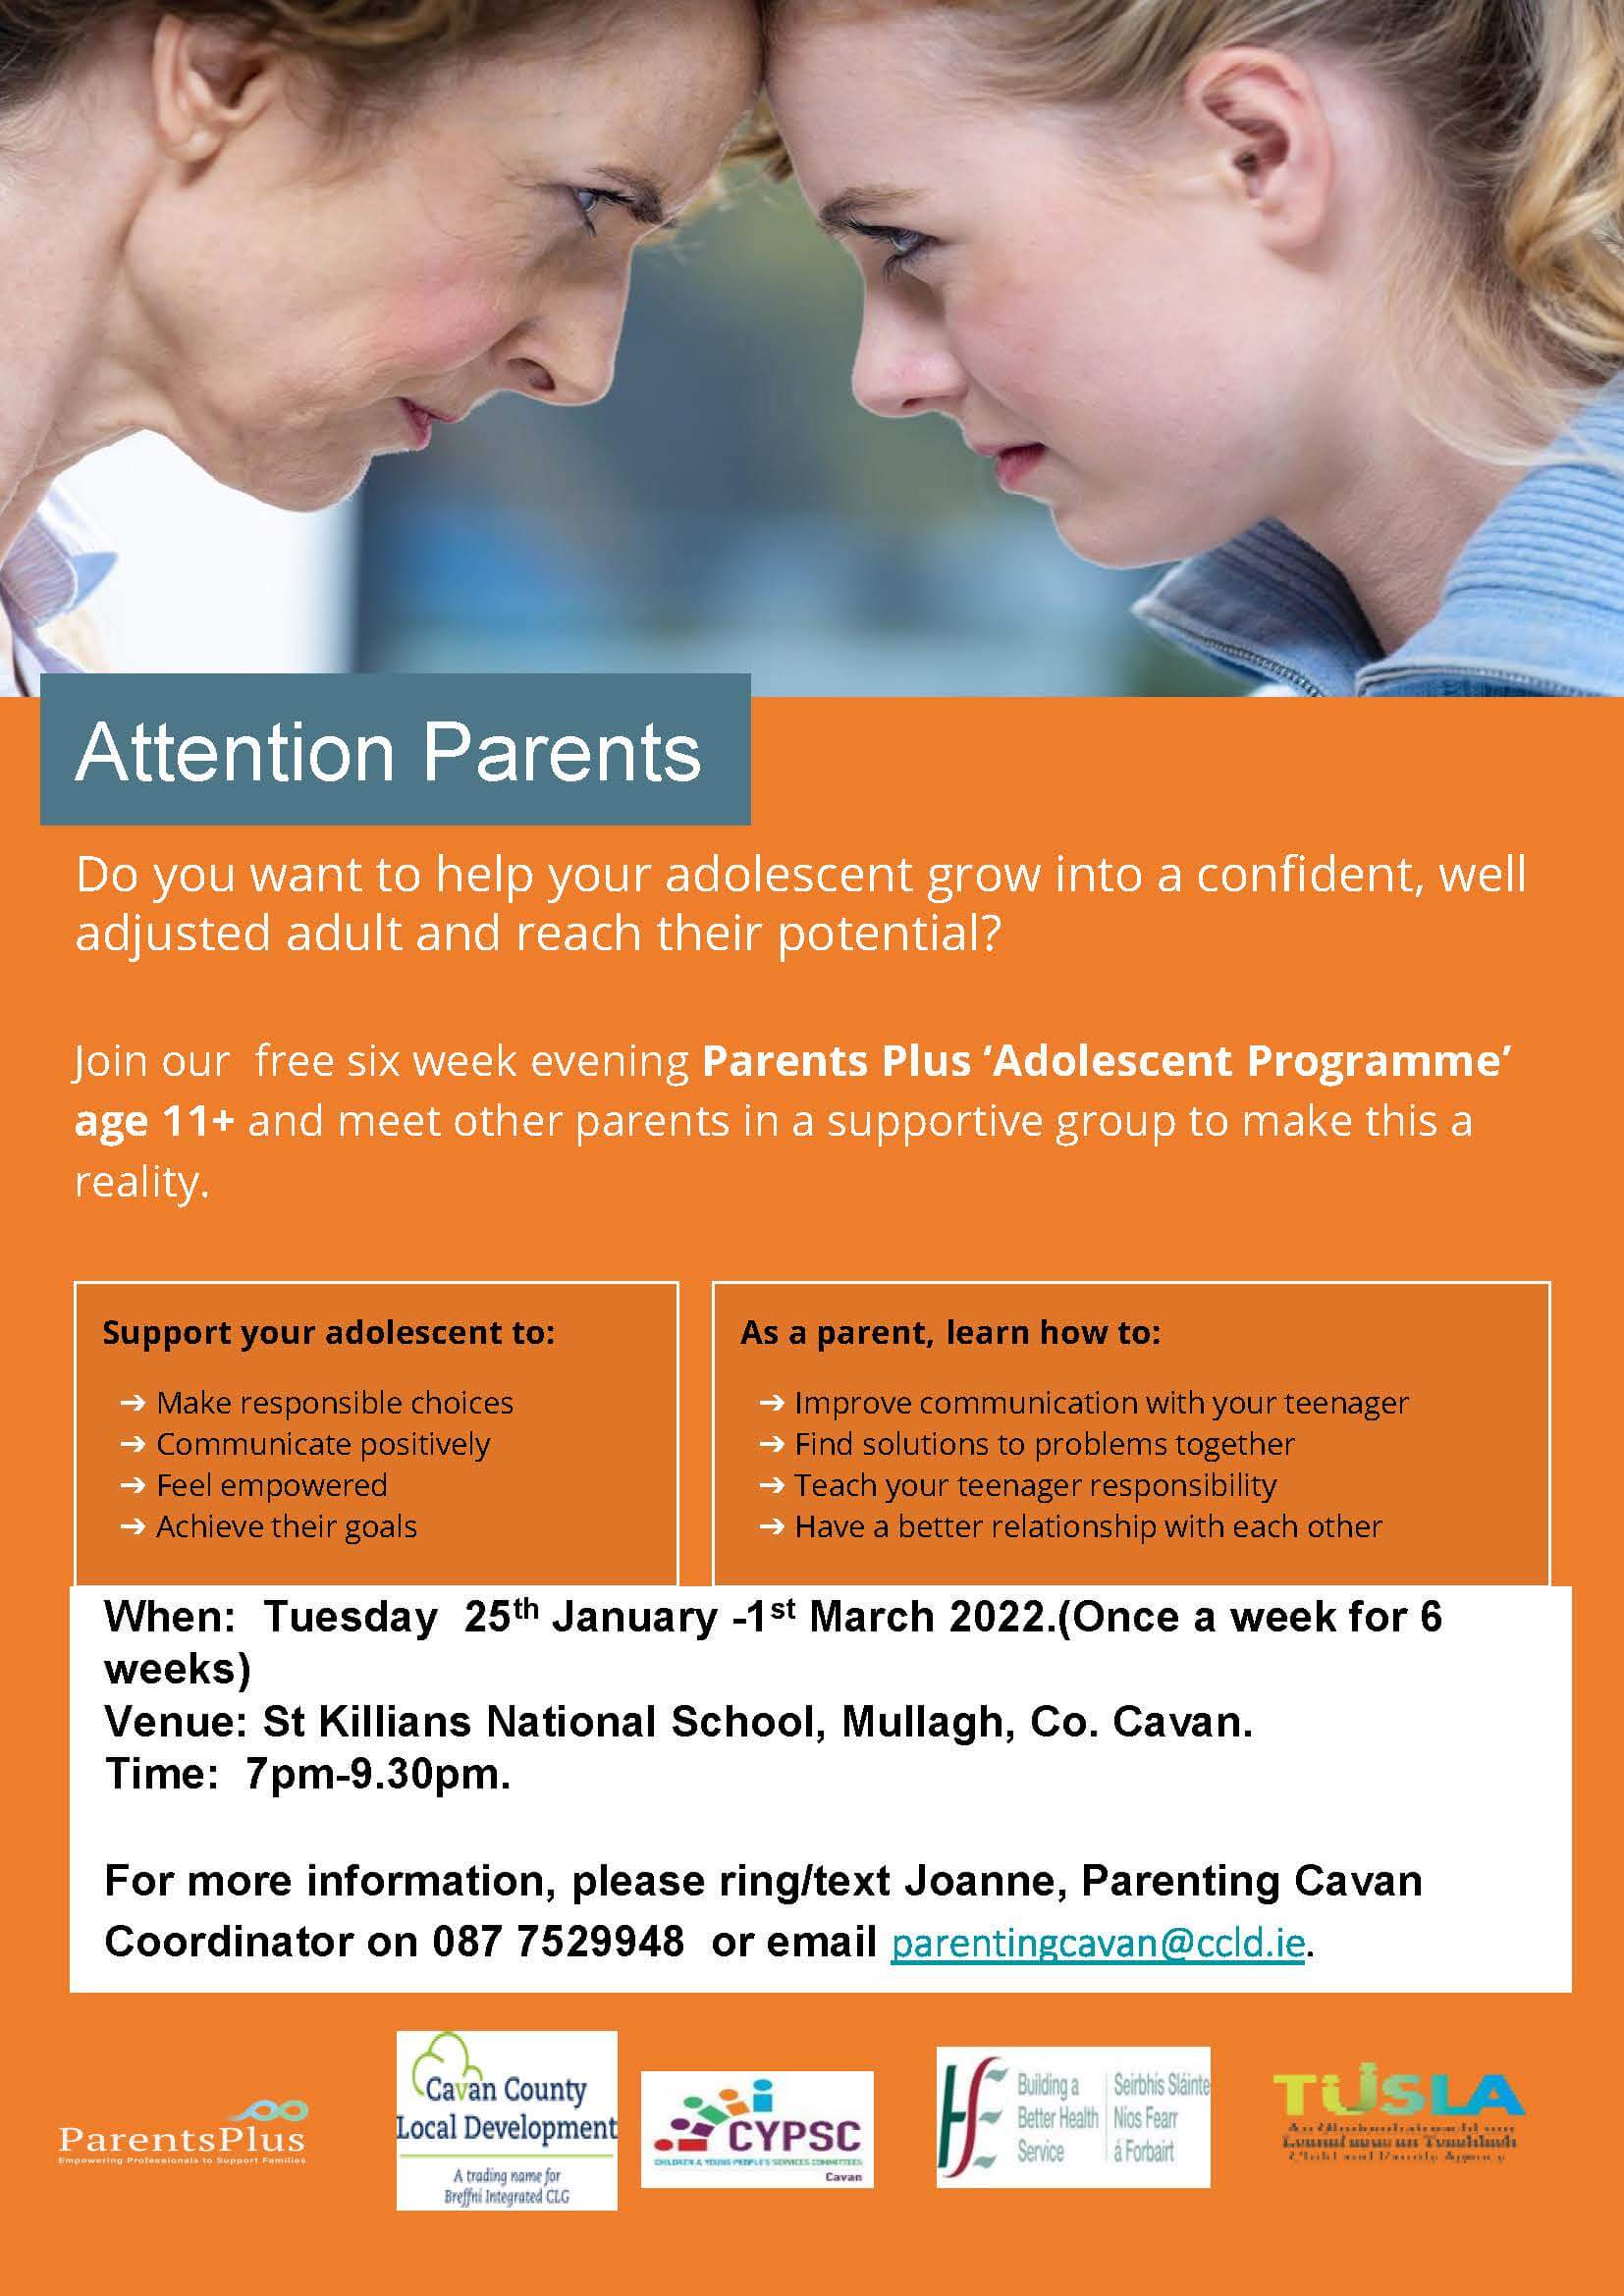 Parent Plus ‘Adolescent Programme’ – A group for parents/guardians who want to help their young person grow into a confident, well adjusted adult that reaches their potential.